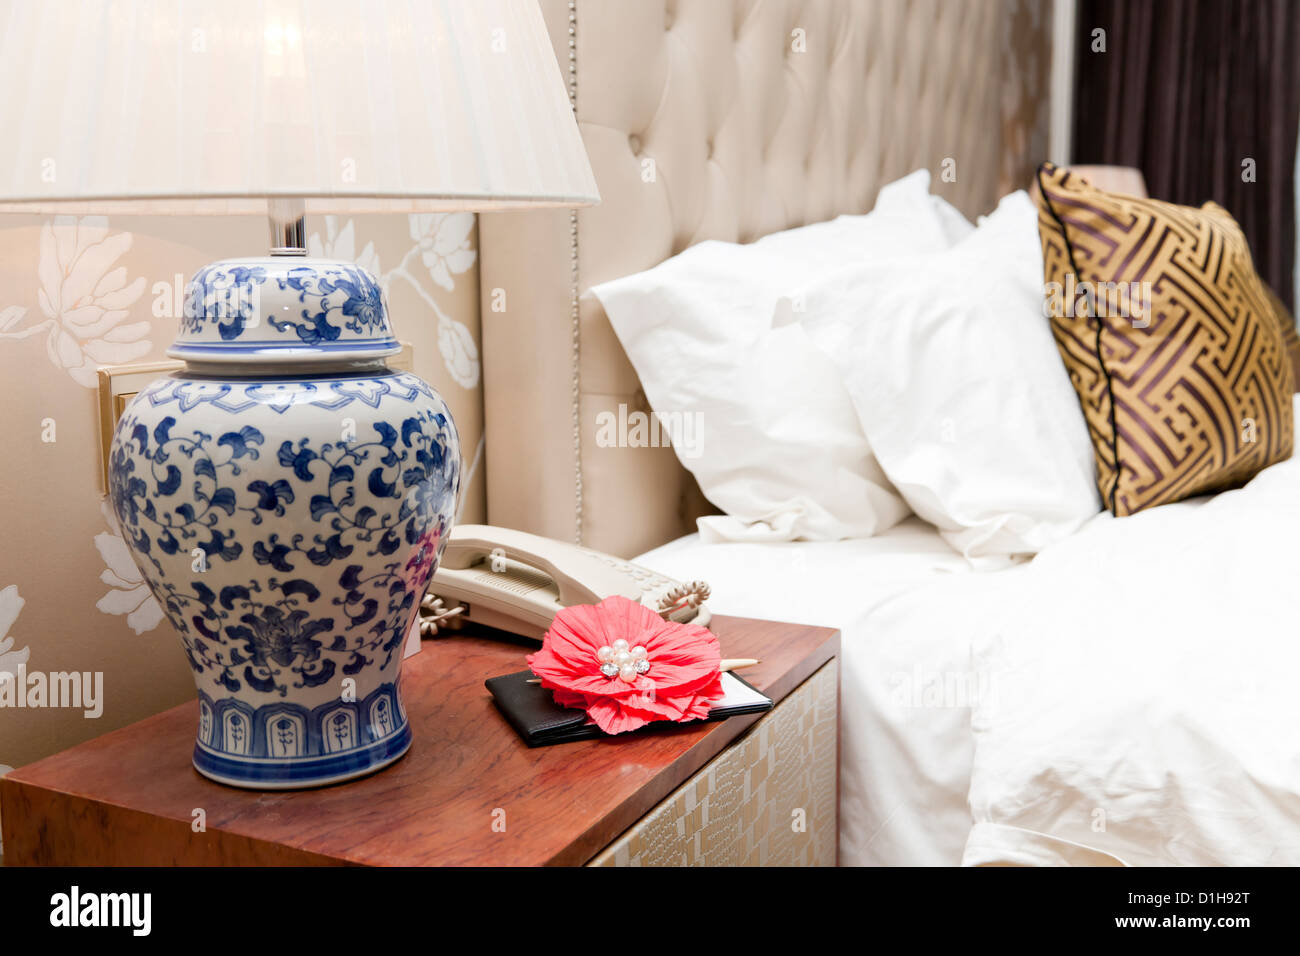 Ornate flower, note pad and telephone on the bed table in hotel room. Stock Photo